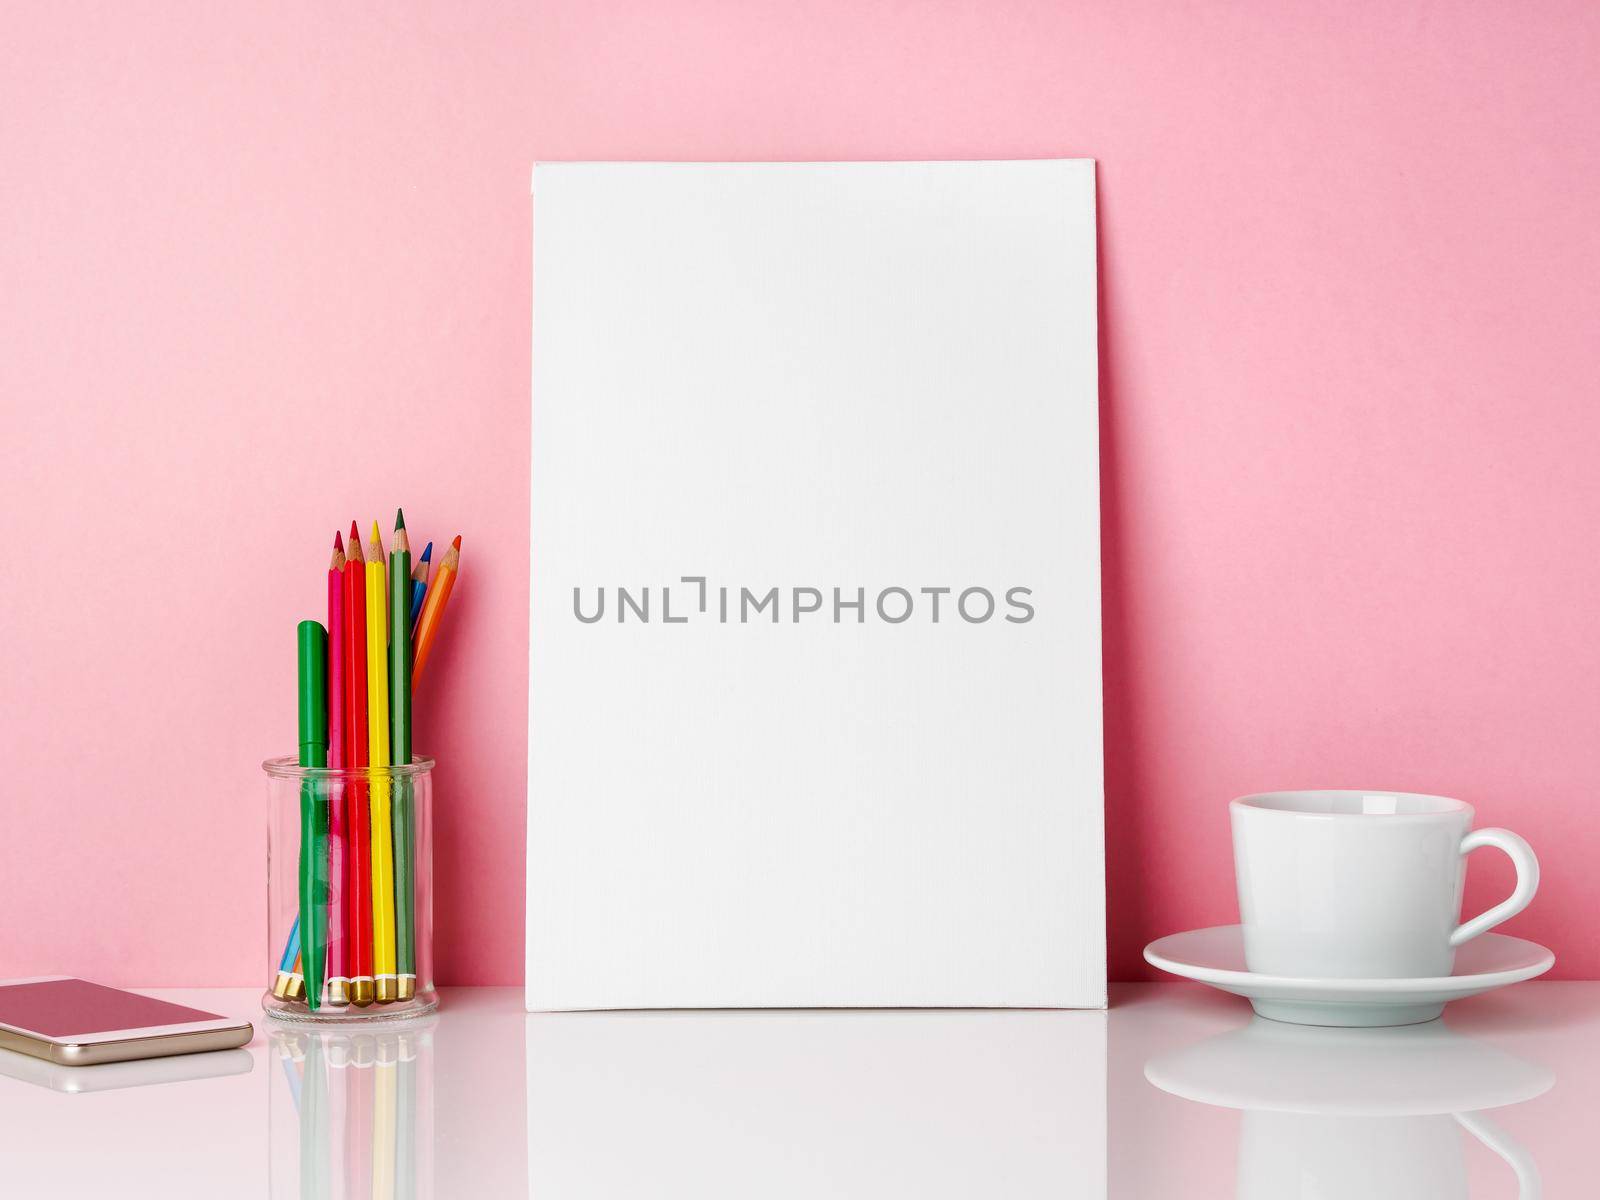 Blank white frame and crayon in jar, cup of coffee r tea on a white table against the pink wall with copy space by NataBene